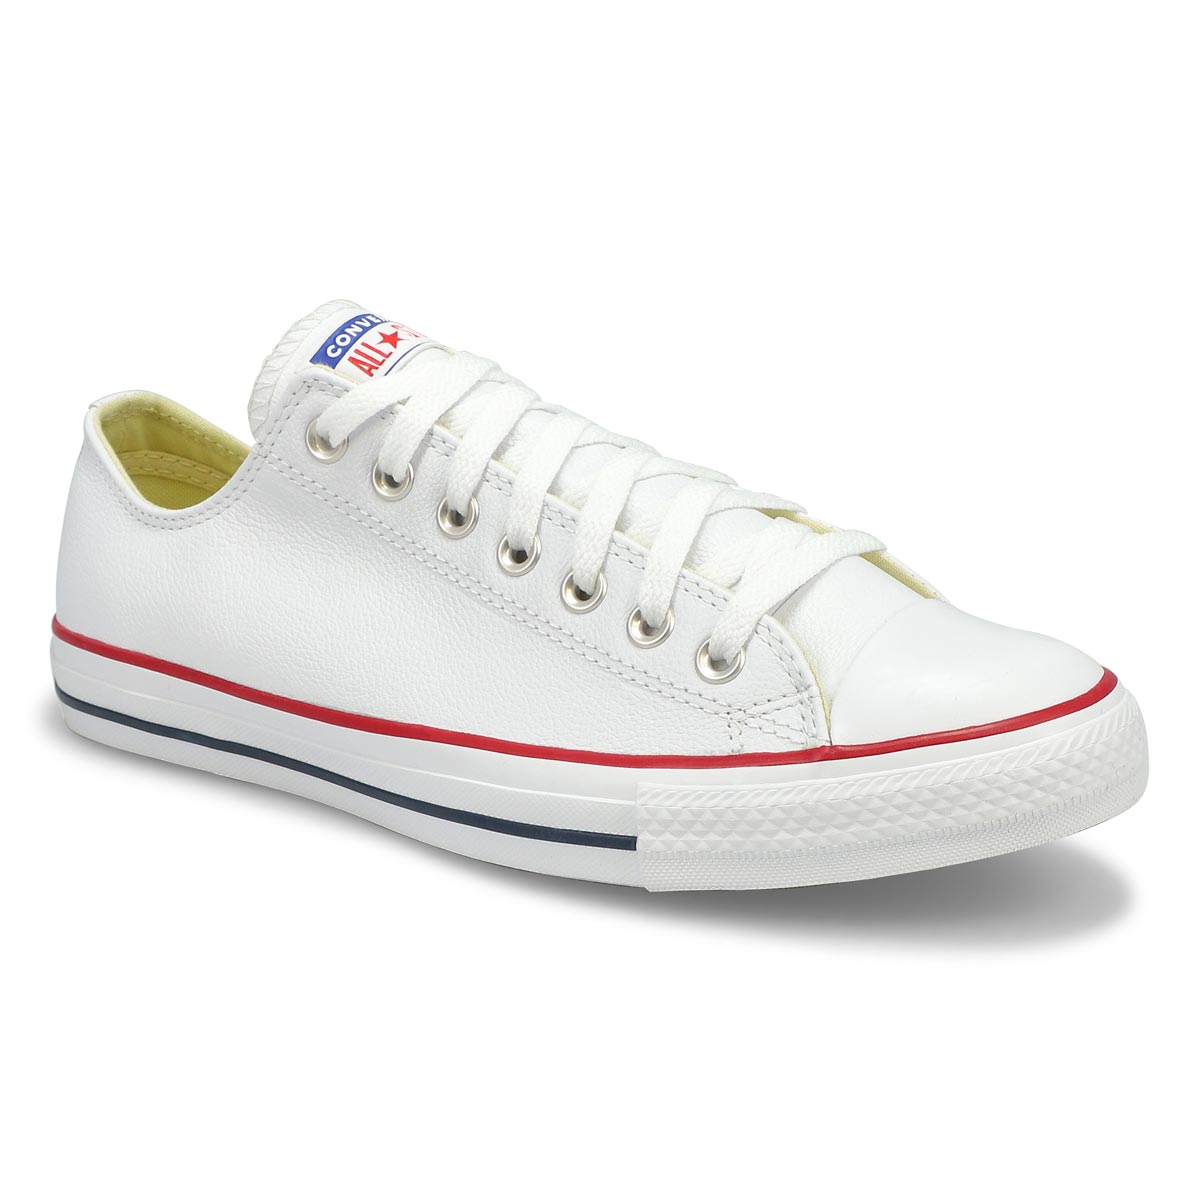 converse chuck taylor all star leather ox white